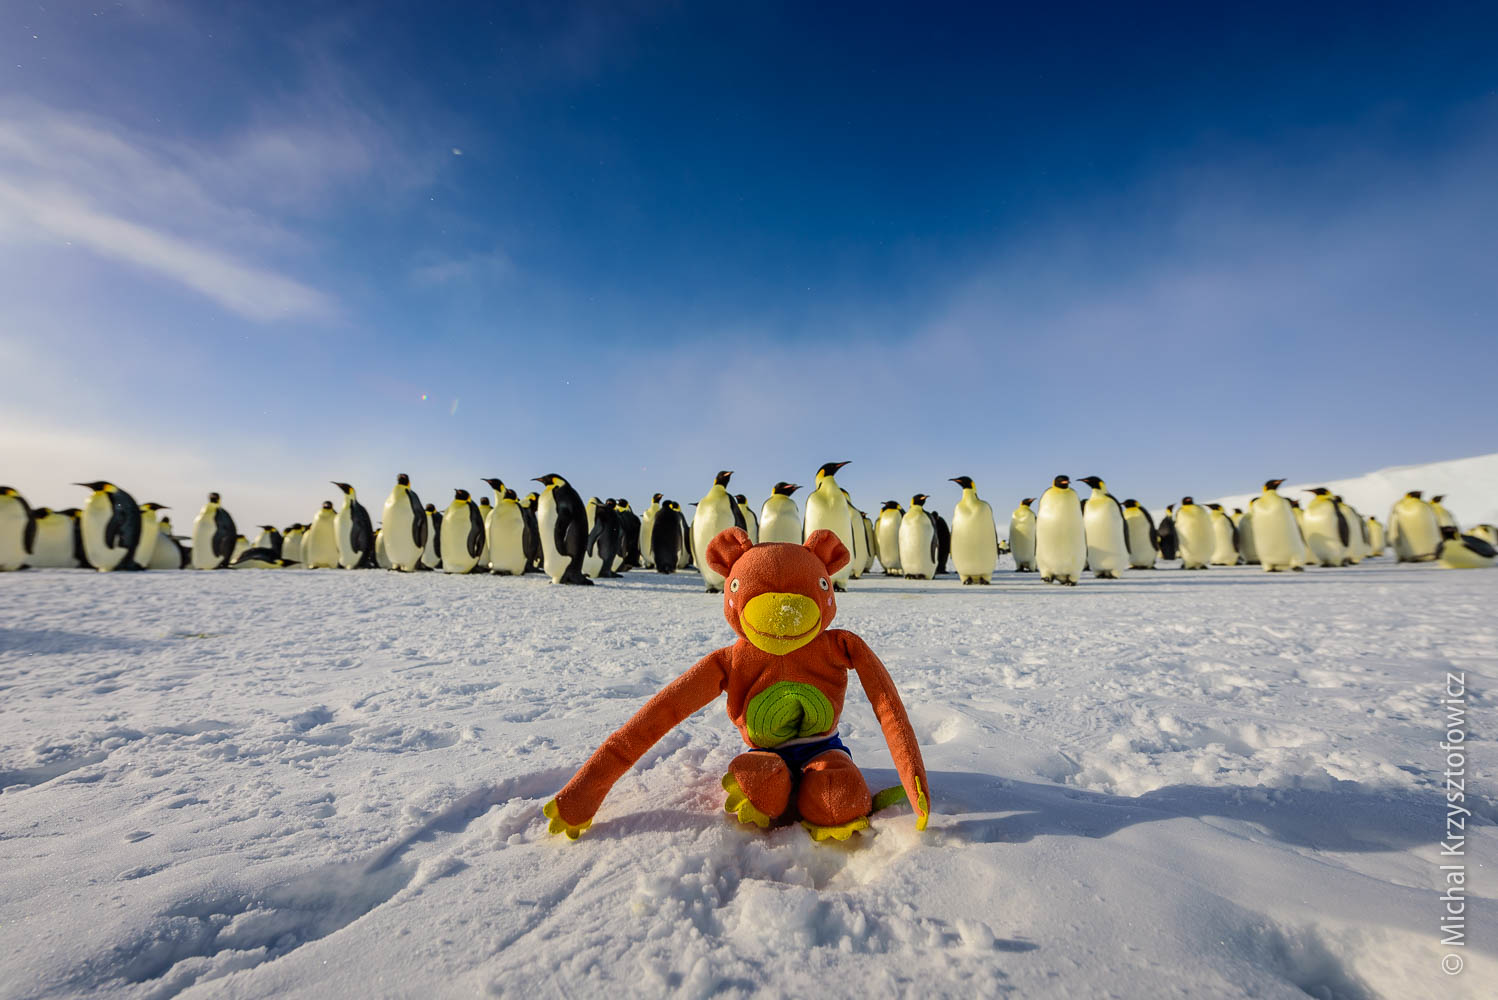 Asystent with Emperor Penguins